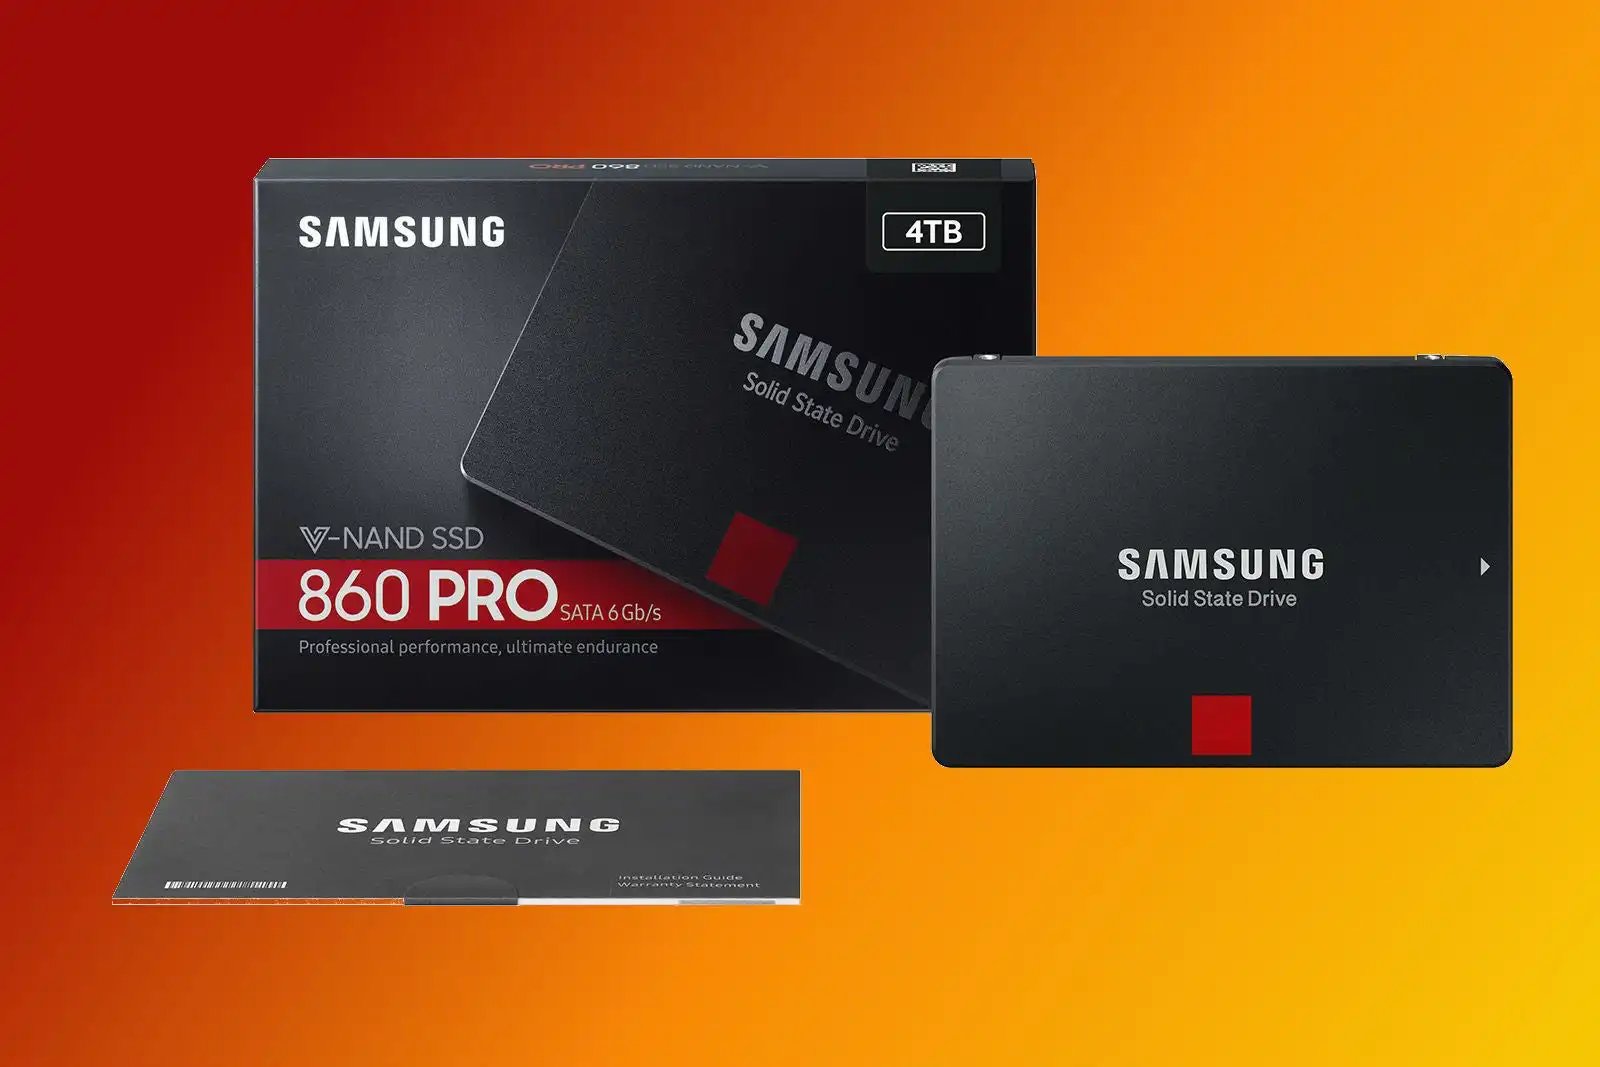 Which Solid State Drive Compares To Samsung Pro